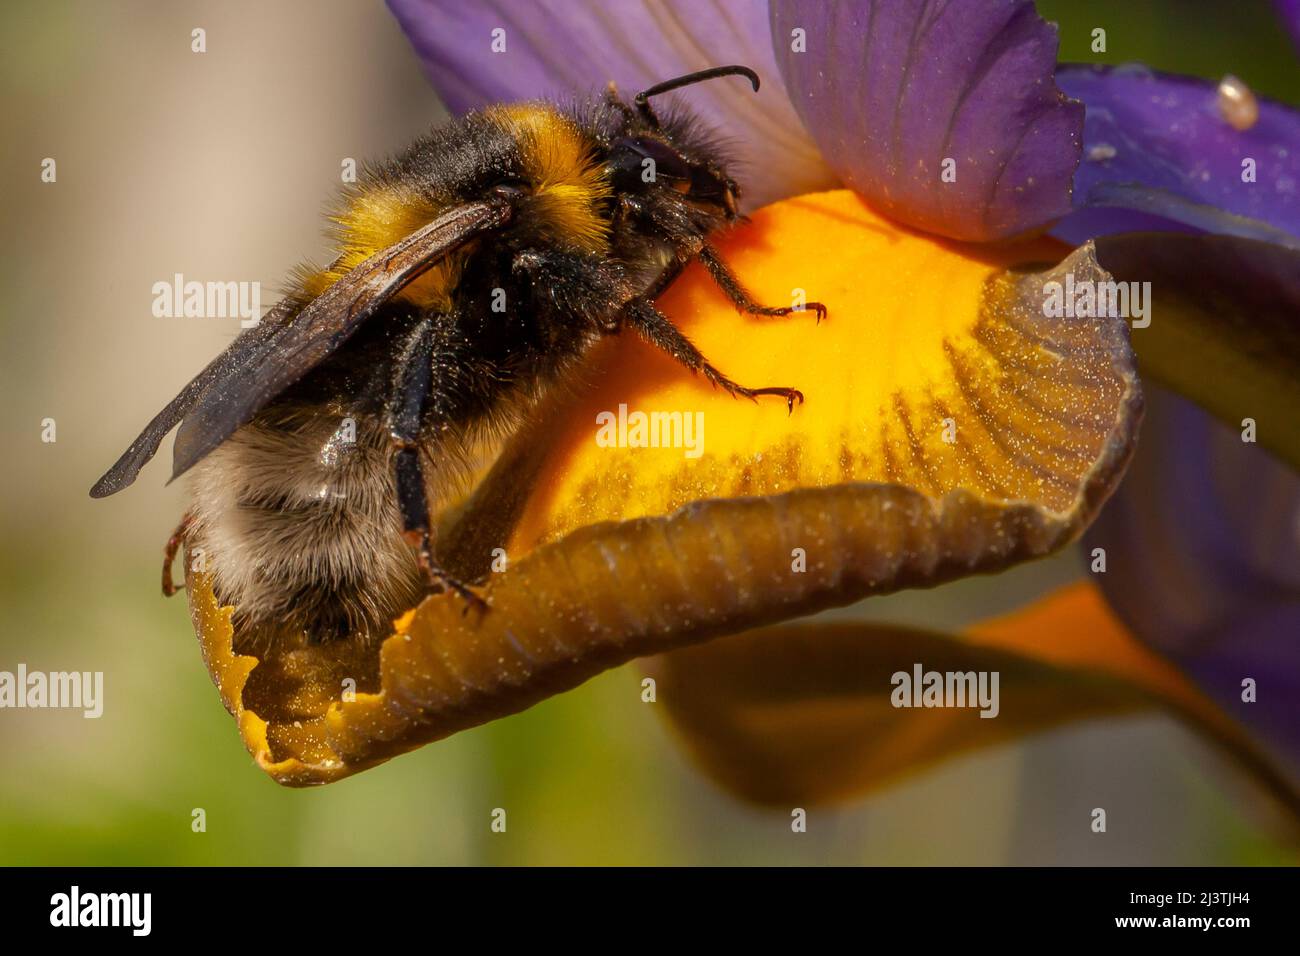 Bumble bee close up on an iris flower petal in summer. Buff tailed insect collecting pollen. Yellow and purple plant Stock Photo